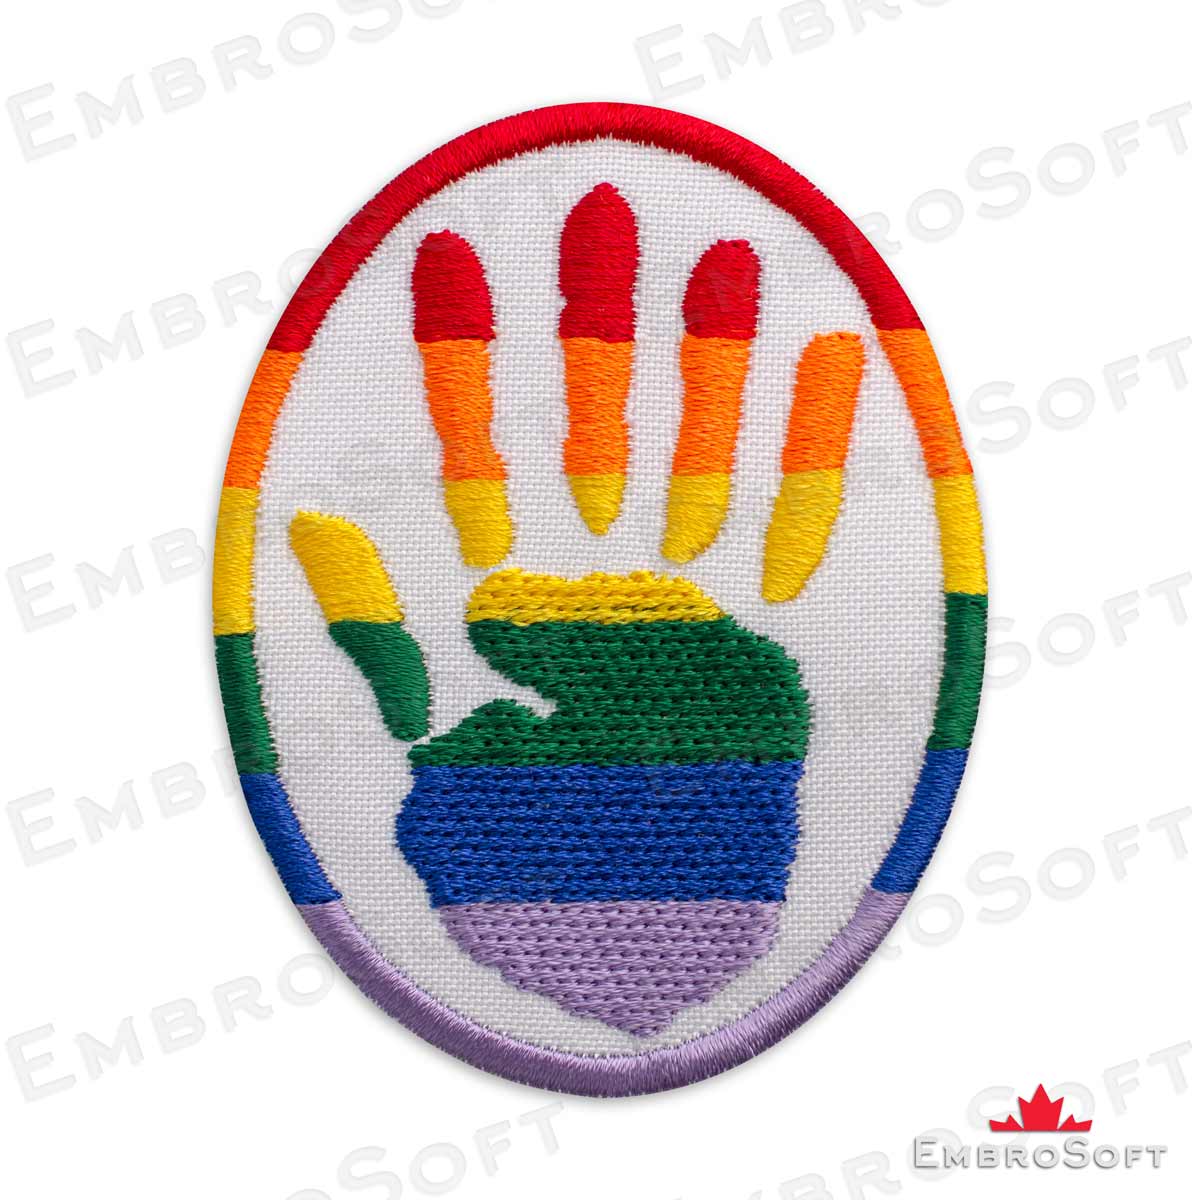 Rainbow Oval Logo - LGBT Rainbow Oval Embroidered Patch with Hand - Embrosoft